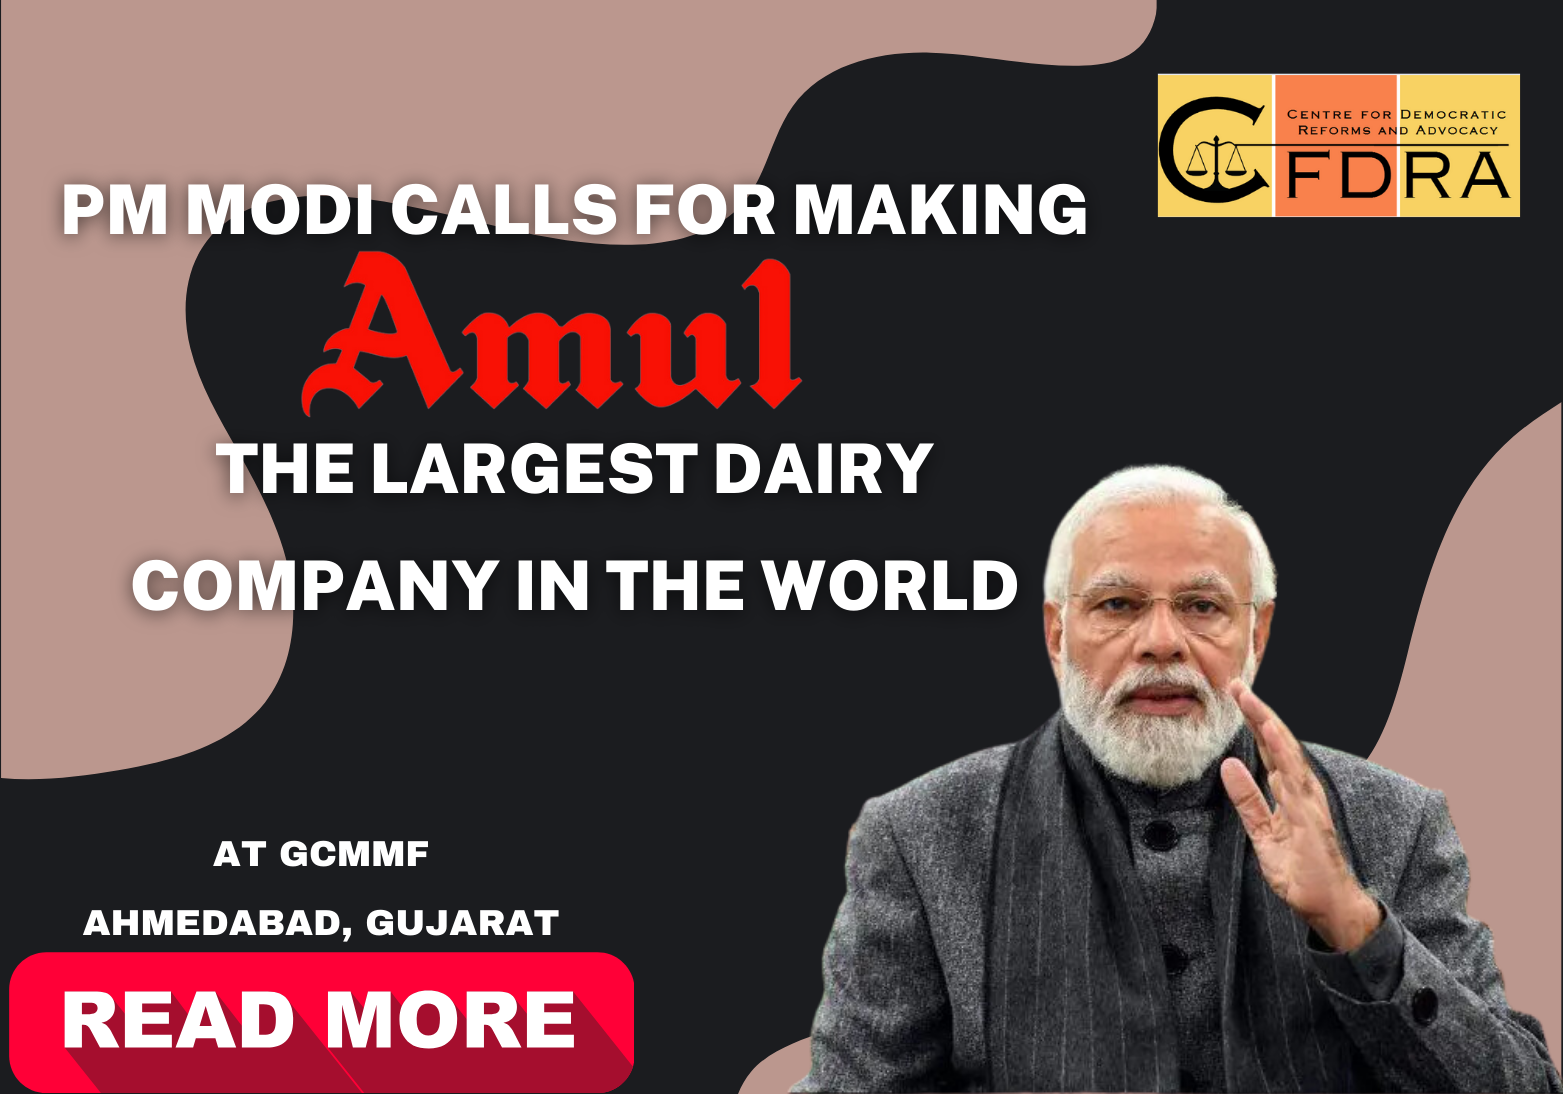 PM Modi Calls for Making ‘Amul’ the Largest Dairy Company in the World at Golden Jubilee Celebrations